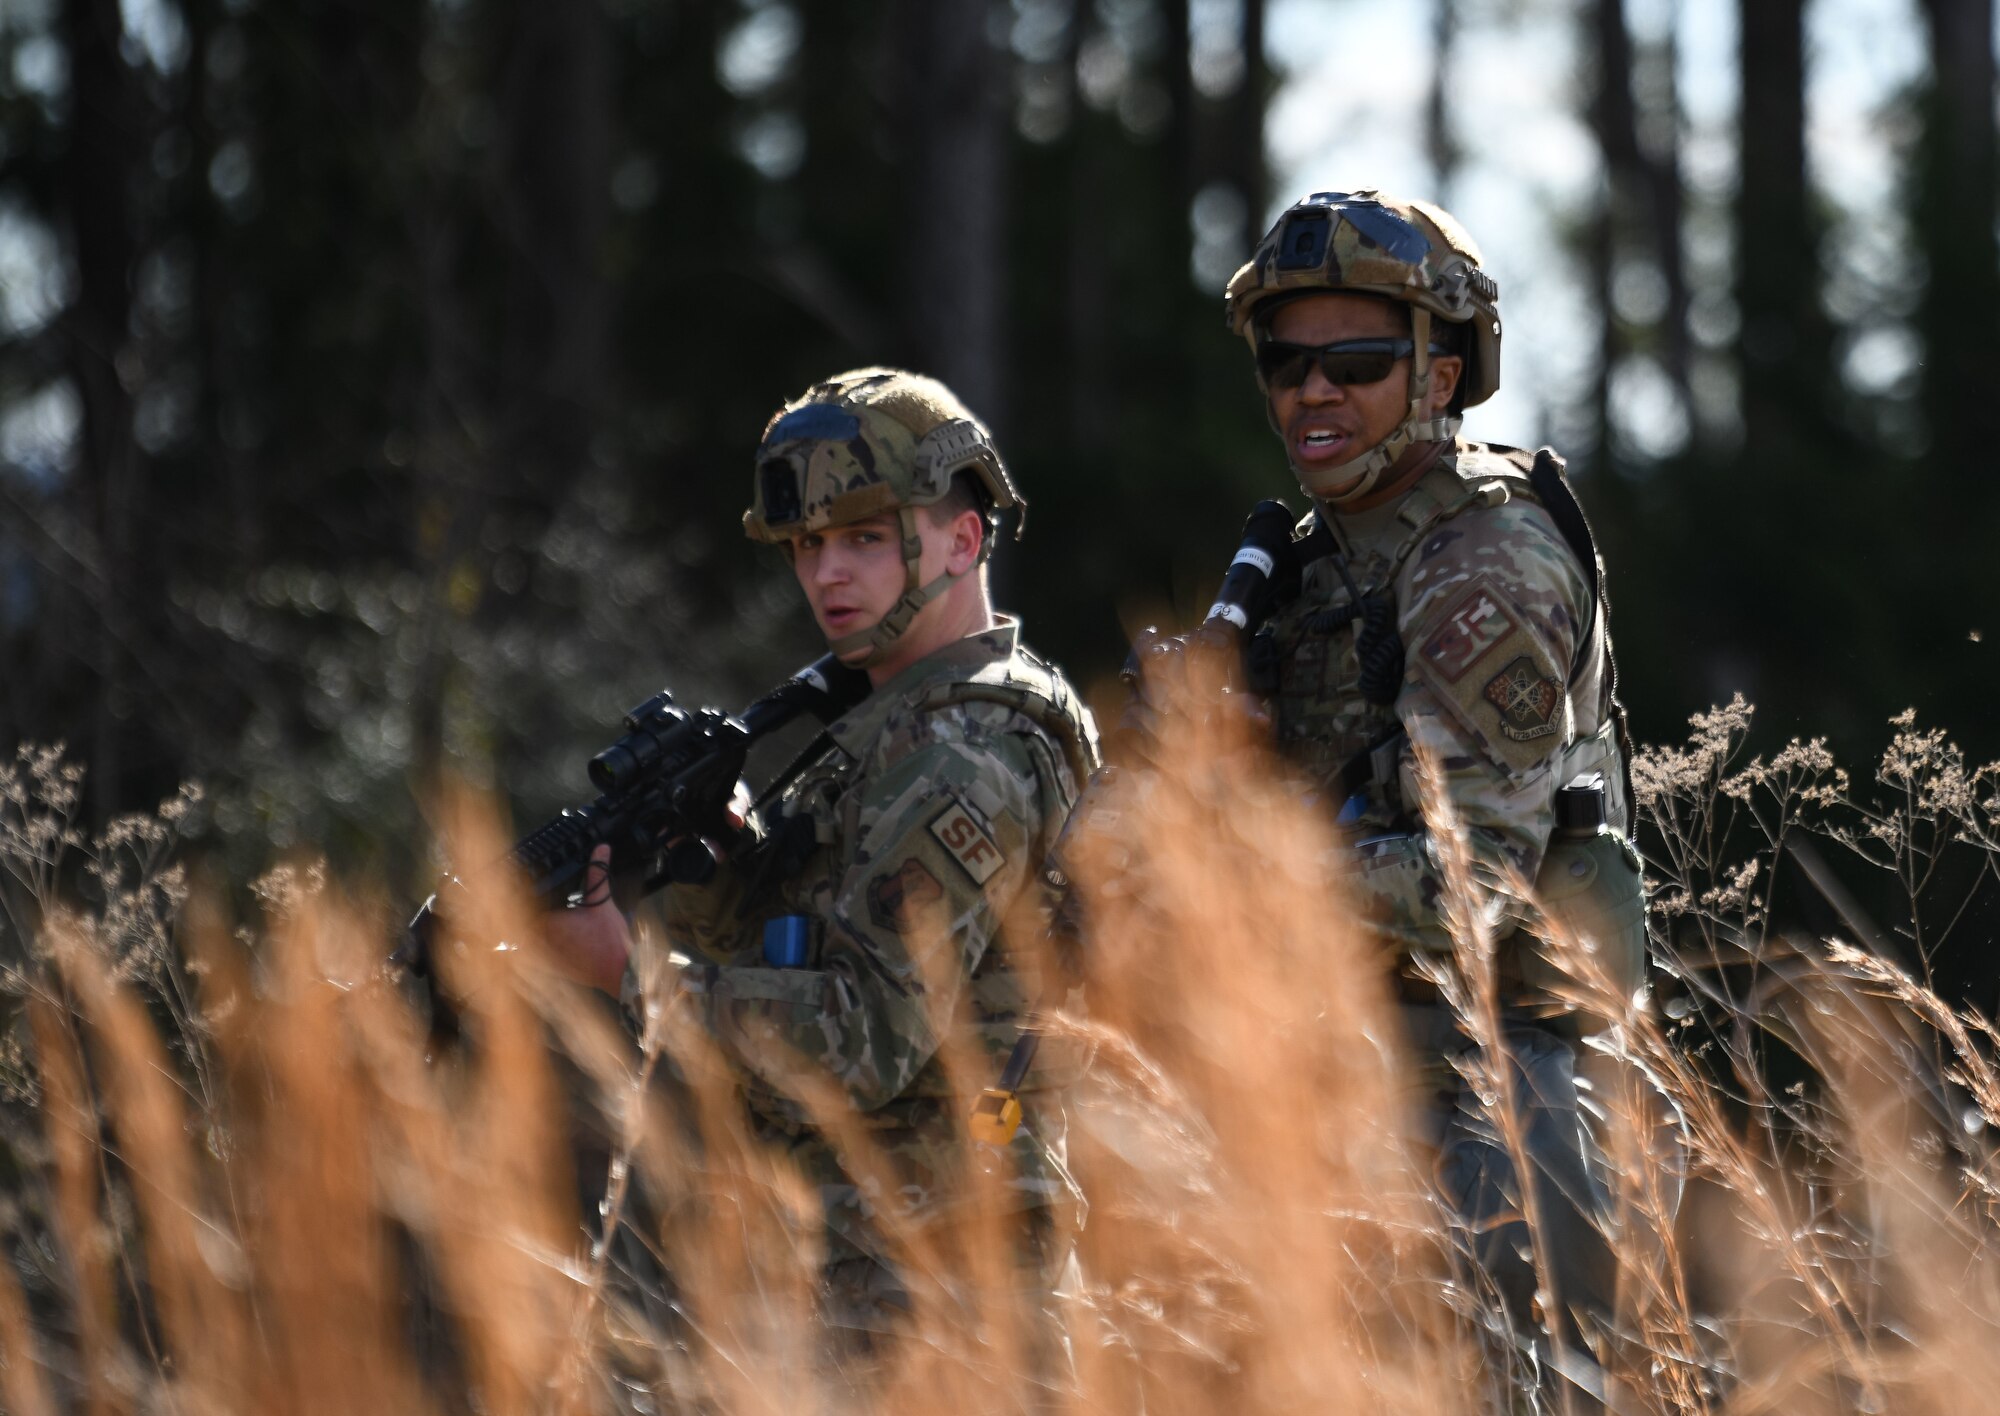 Two Airmen assigned to the 172nd Security Forces Squadron survey a training field during a simulated base attack in Jackson, Mississippi on Jan. 29, 2023. The large-scale readiness exercise tested the Wing’s ability to operate in a deployed environment under various levels of threats. (U.S. Air National Guard photo by Airman 1st Class Shardae McAfee)